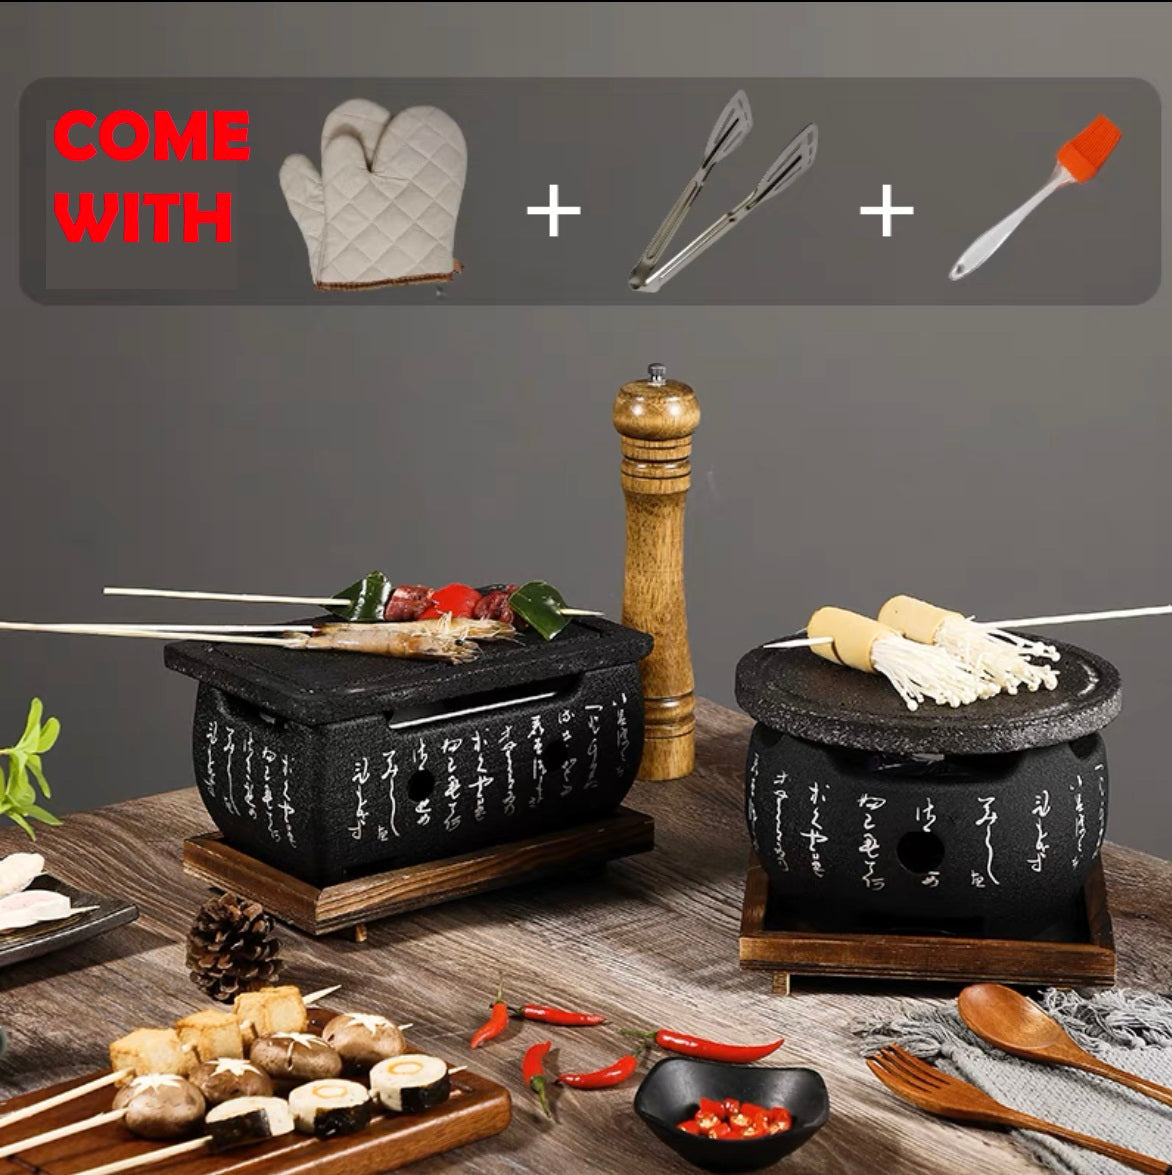 6IN1 TABLE TOP CERAMIC BARBECUE/HIBACHI GRILL JAPANESE-KOREAN STYLE